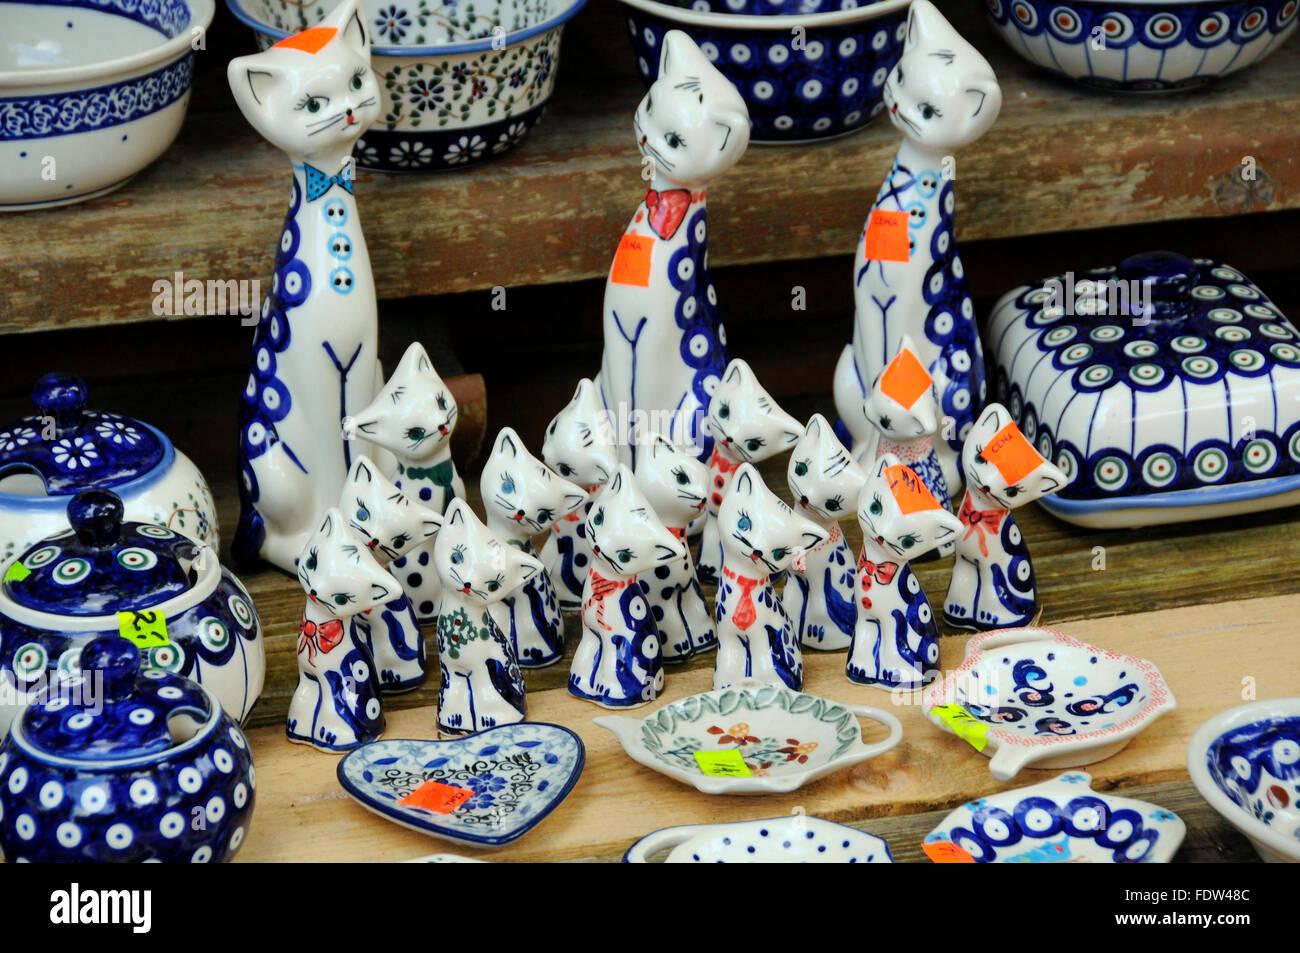 Cat ceramics pottery earthenware figurines colourful from Boleslawiec at a market stall in Karpacz, Poland Stock Photo